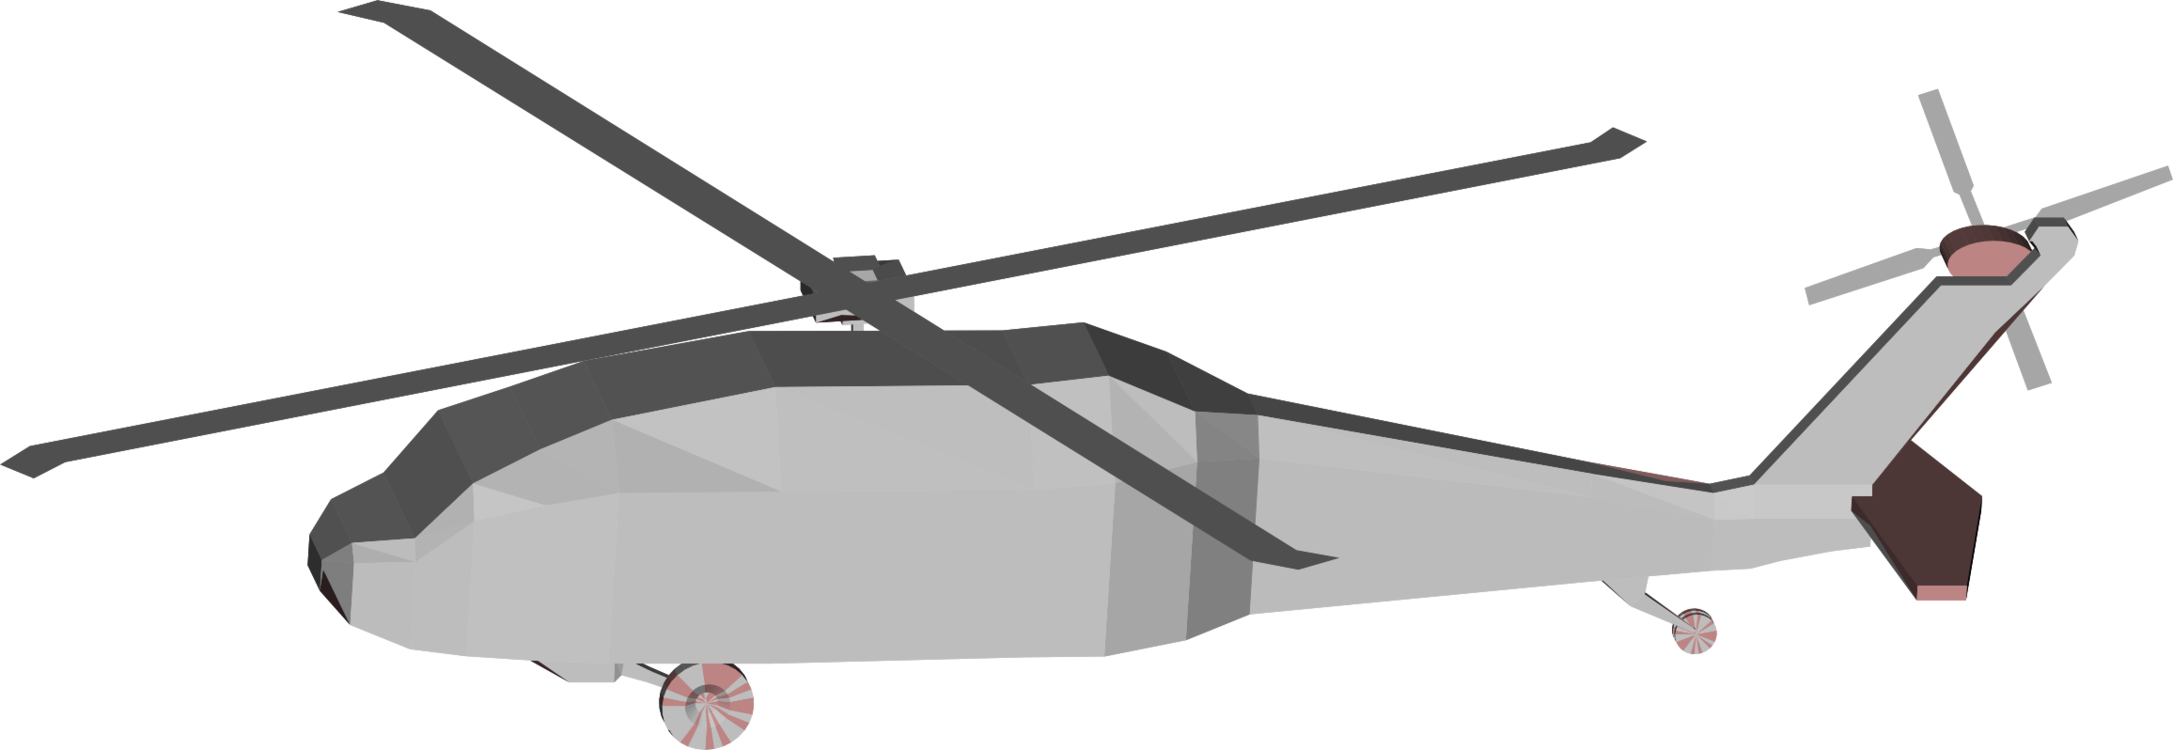 Rotorcraft,Helicopter Rotor,Tiltrotor